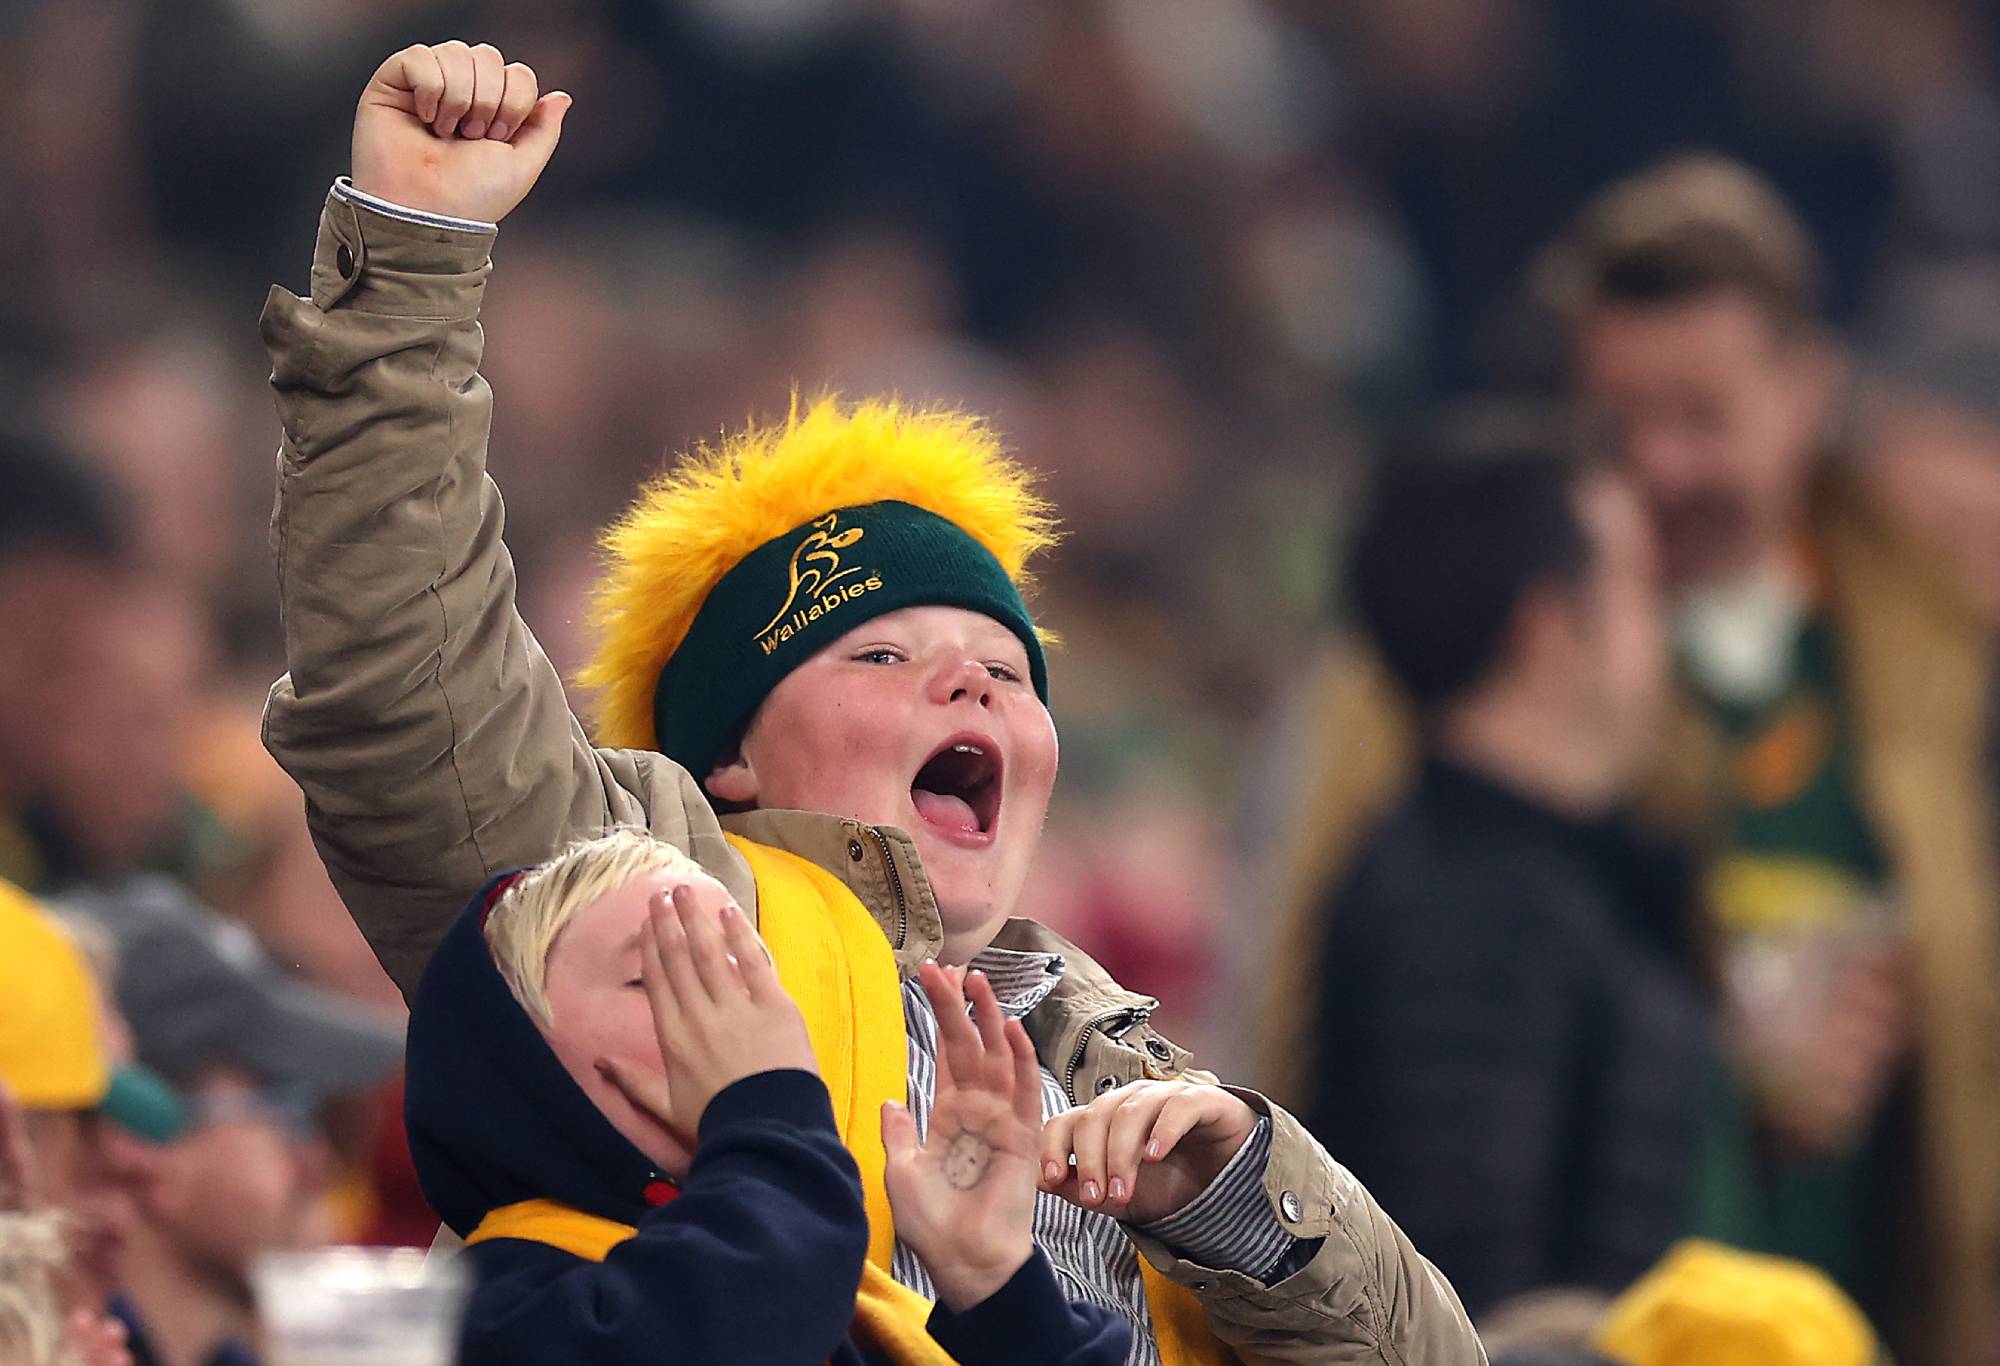 A young Wallabies fan shows support during The Rugby Championship match between the Australia Wallabies and South Africa Springboks at Allianz Stadium on September 03, 2022 in Sydney, Australia. (Photo by Mark Kolbe/Getty Images)